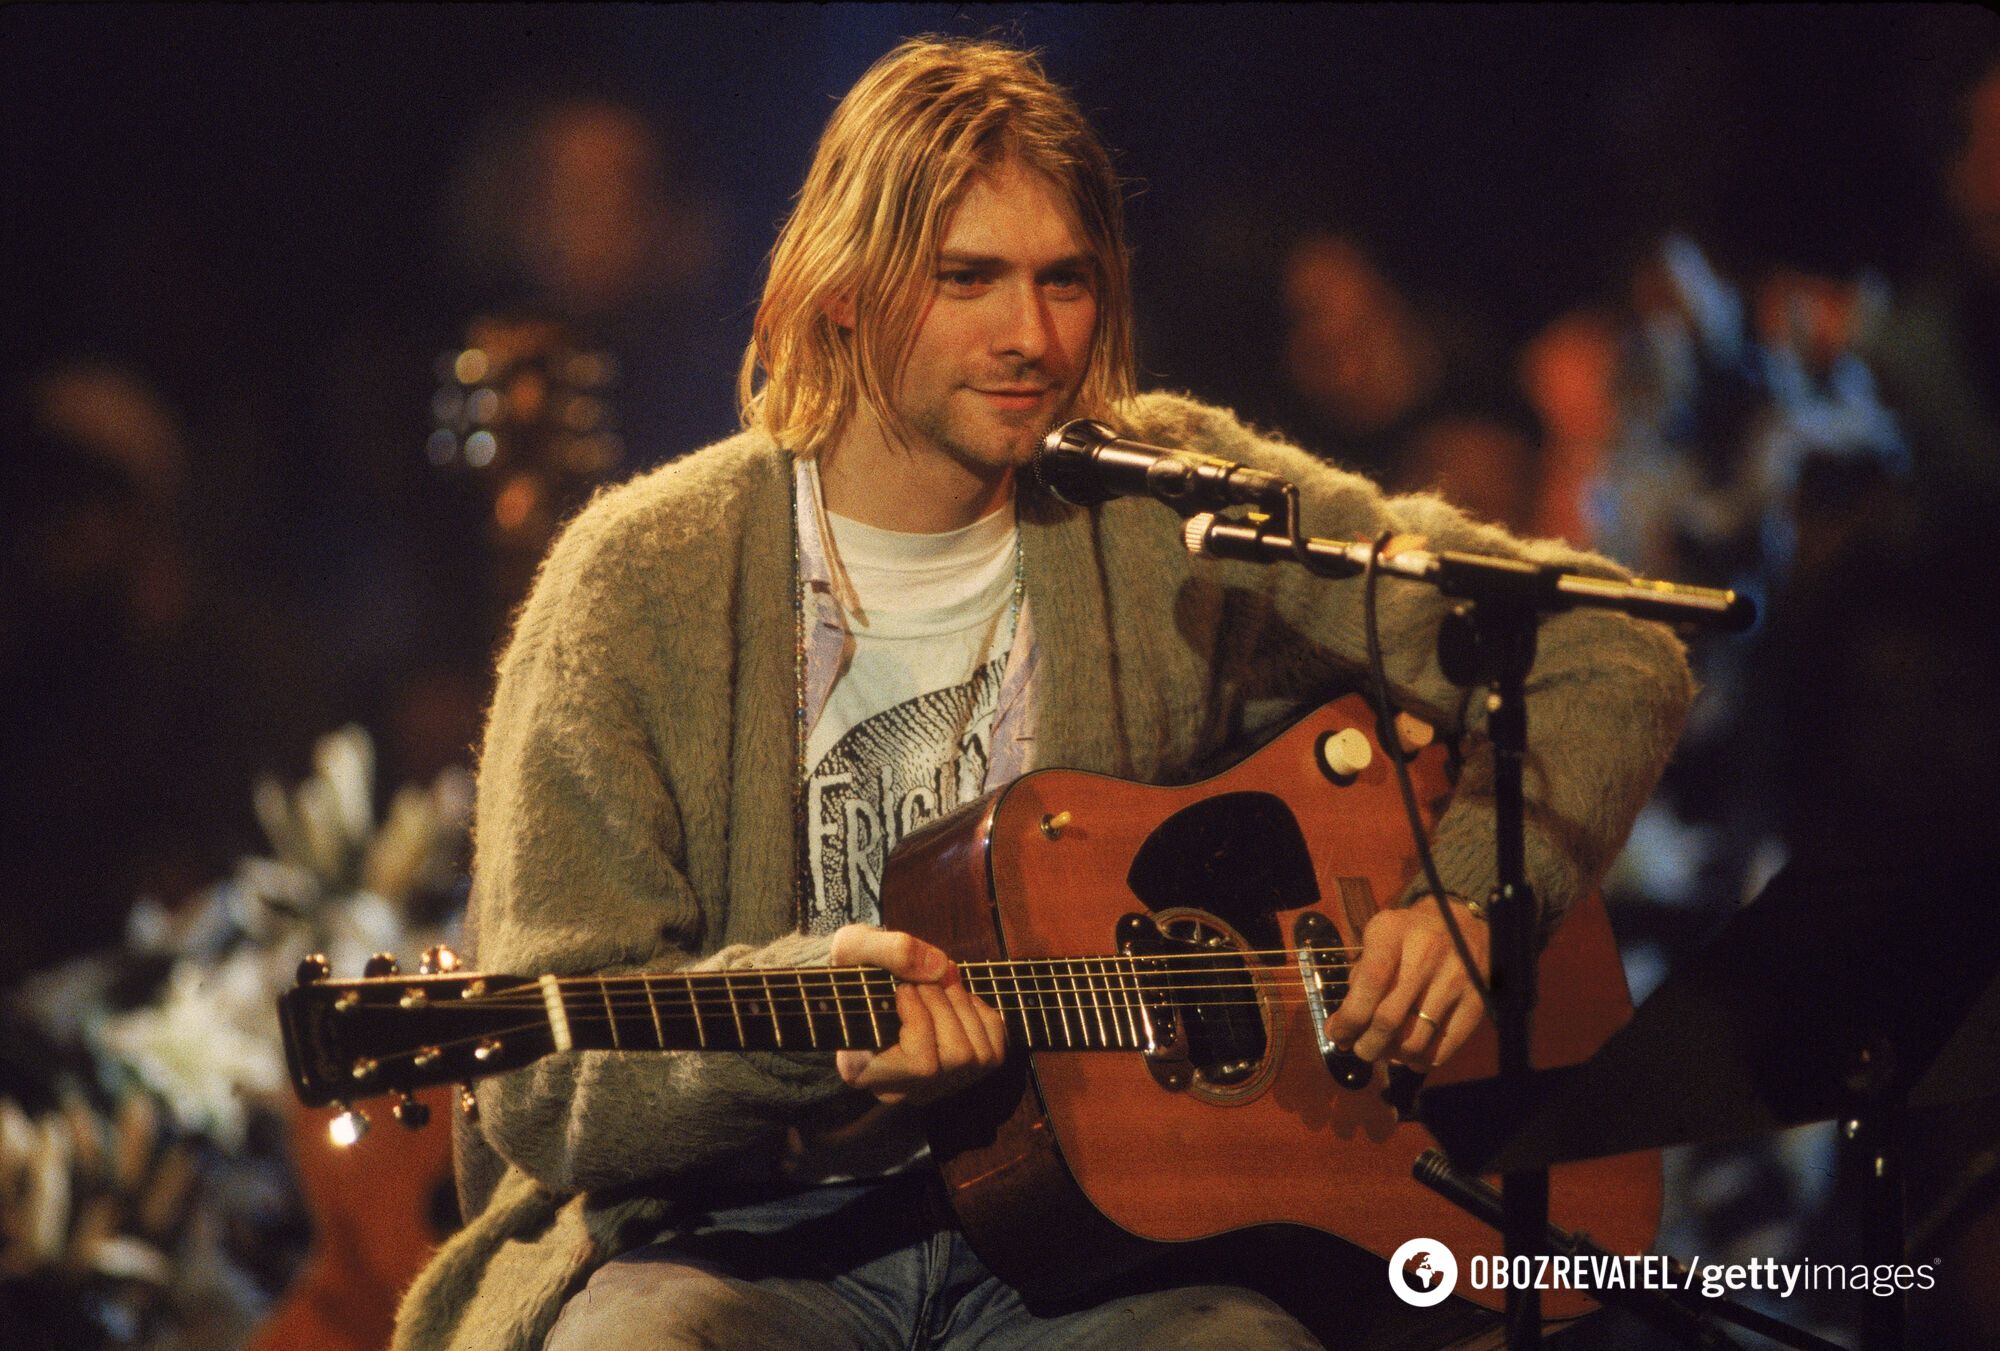 Drugs since the age of 13, a high-profile scandal on MTV, and a terrible suicide. What tragedies were hidden behind the fame of Nirvana leader Kurt Cobain